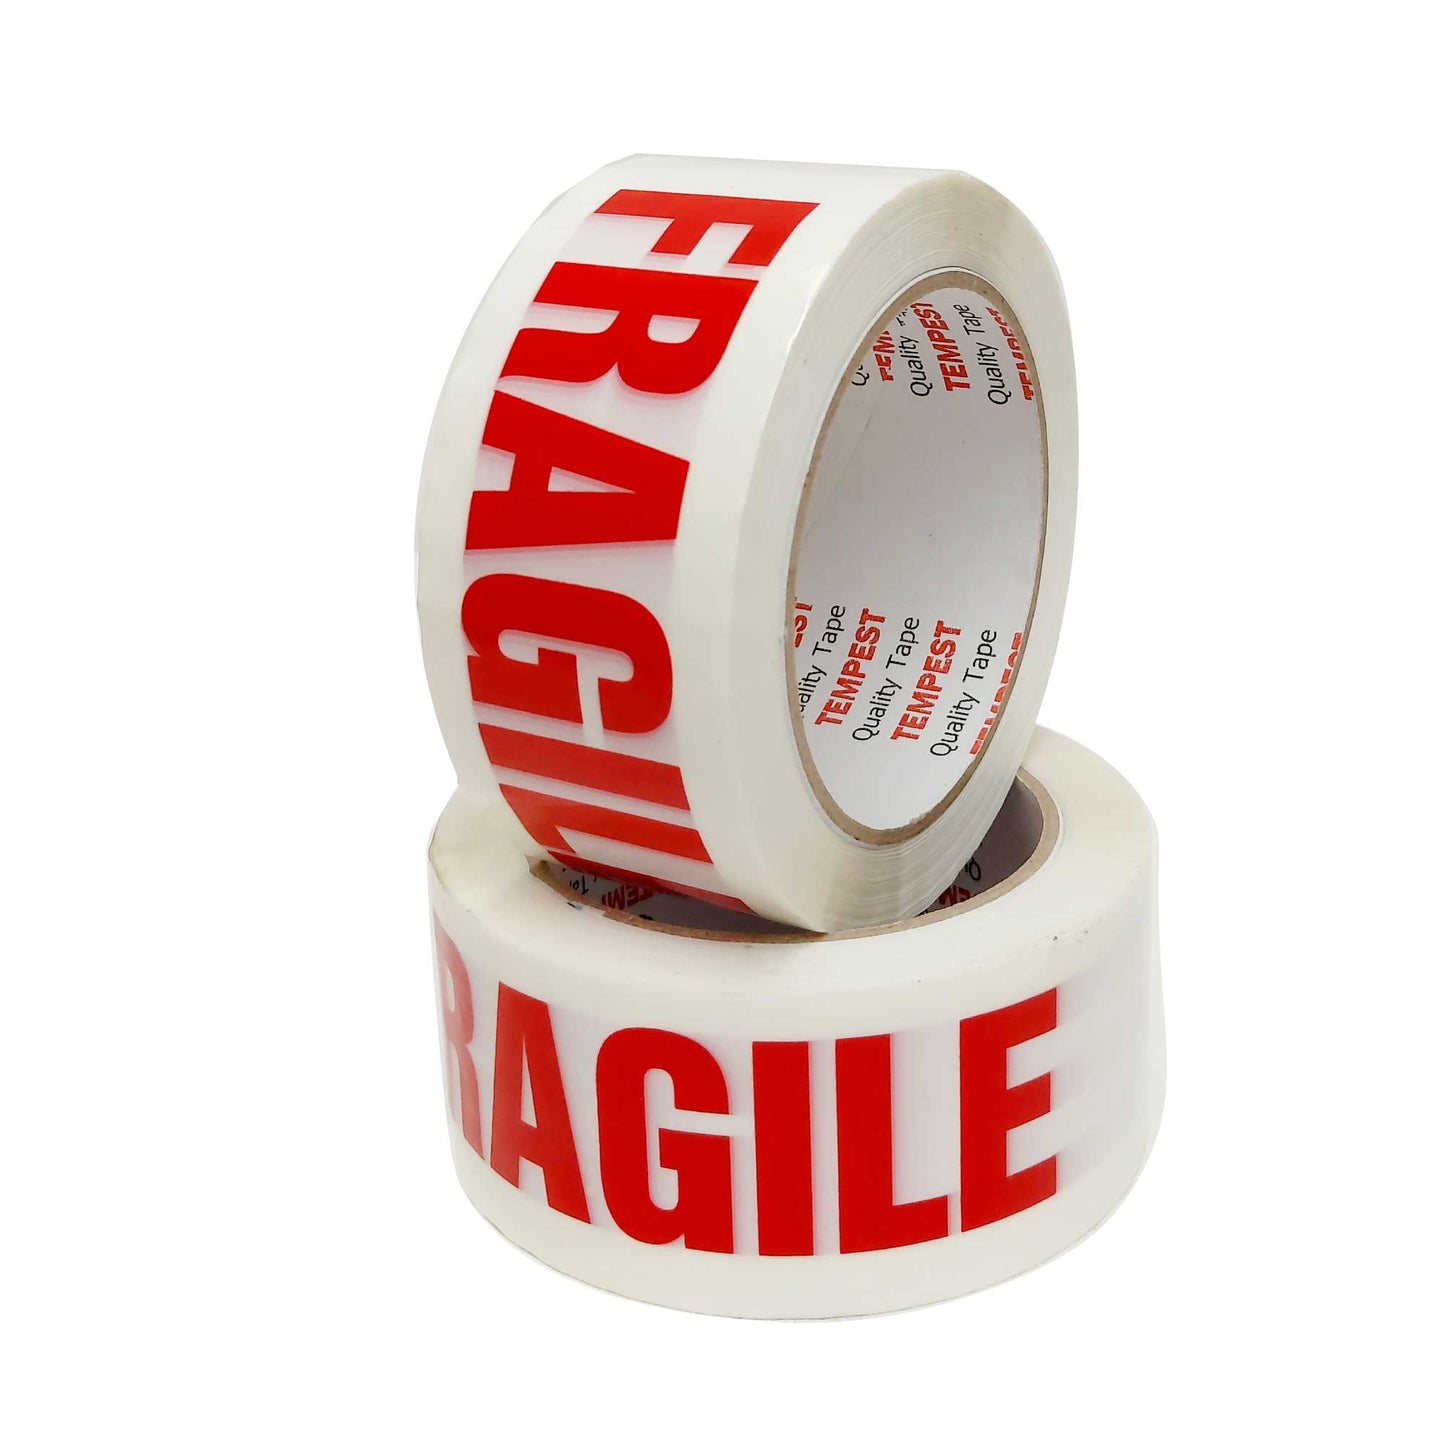 6x Fragile Packing Tape 48mmx75m Long Rolls Red White Packaging Adhesive Label